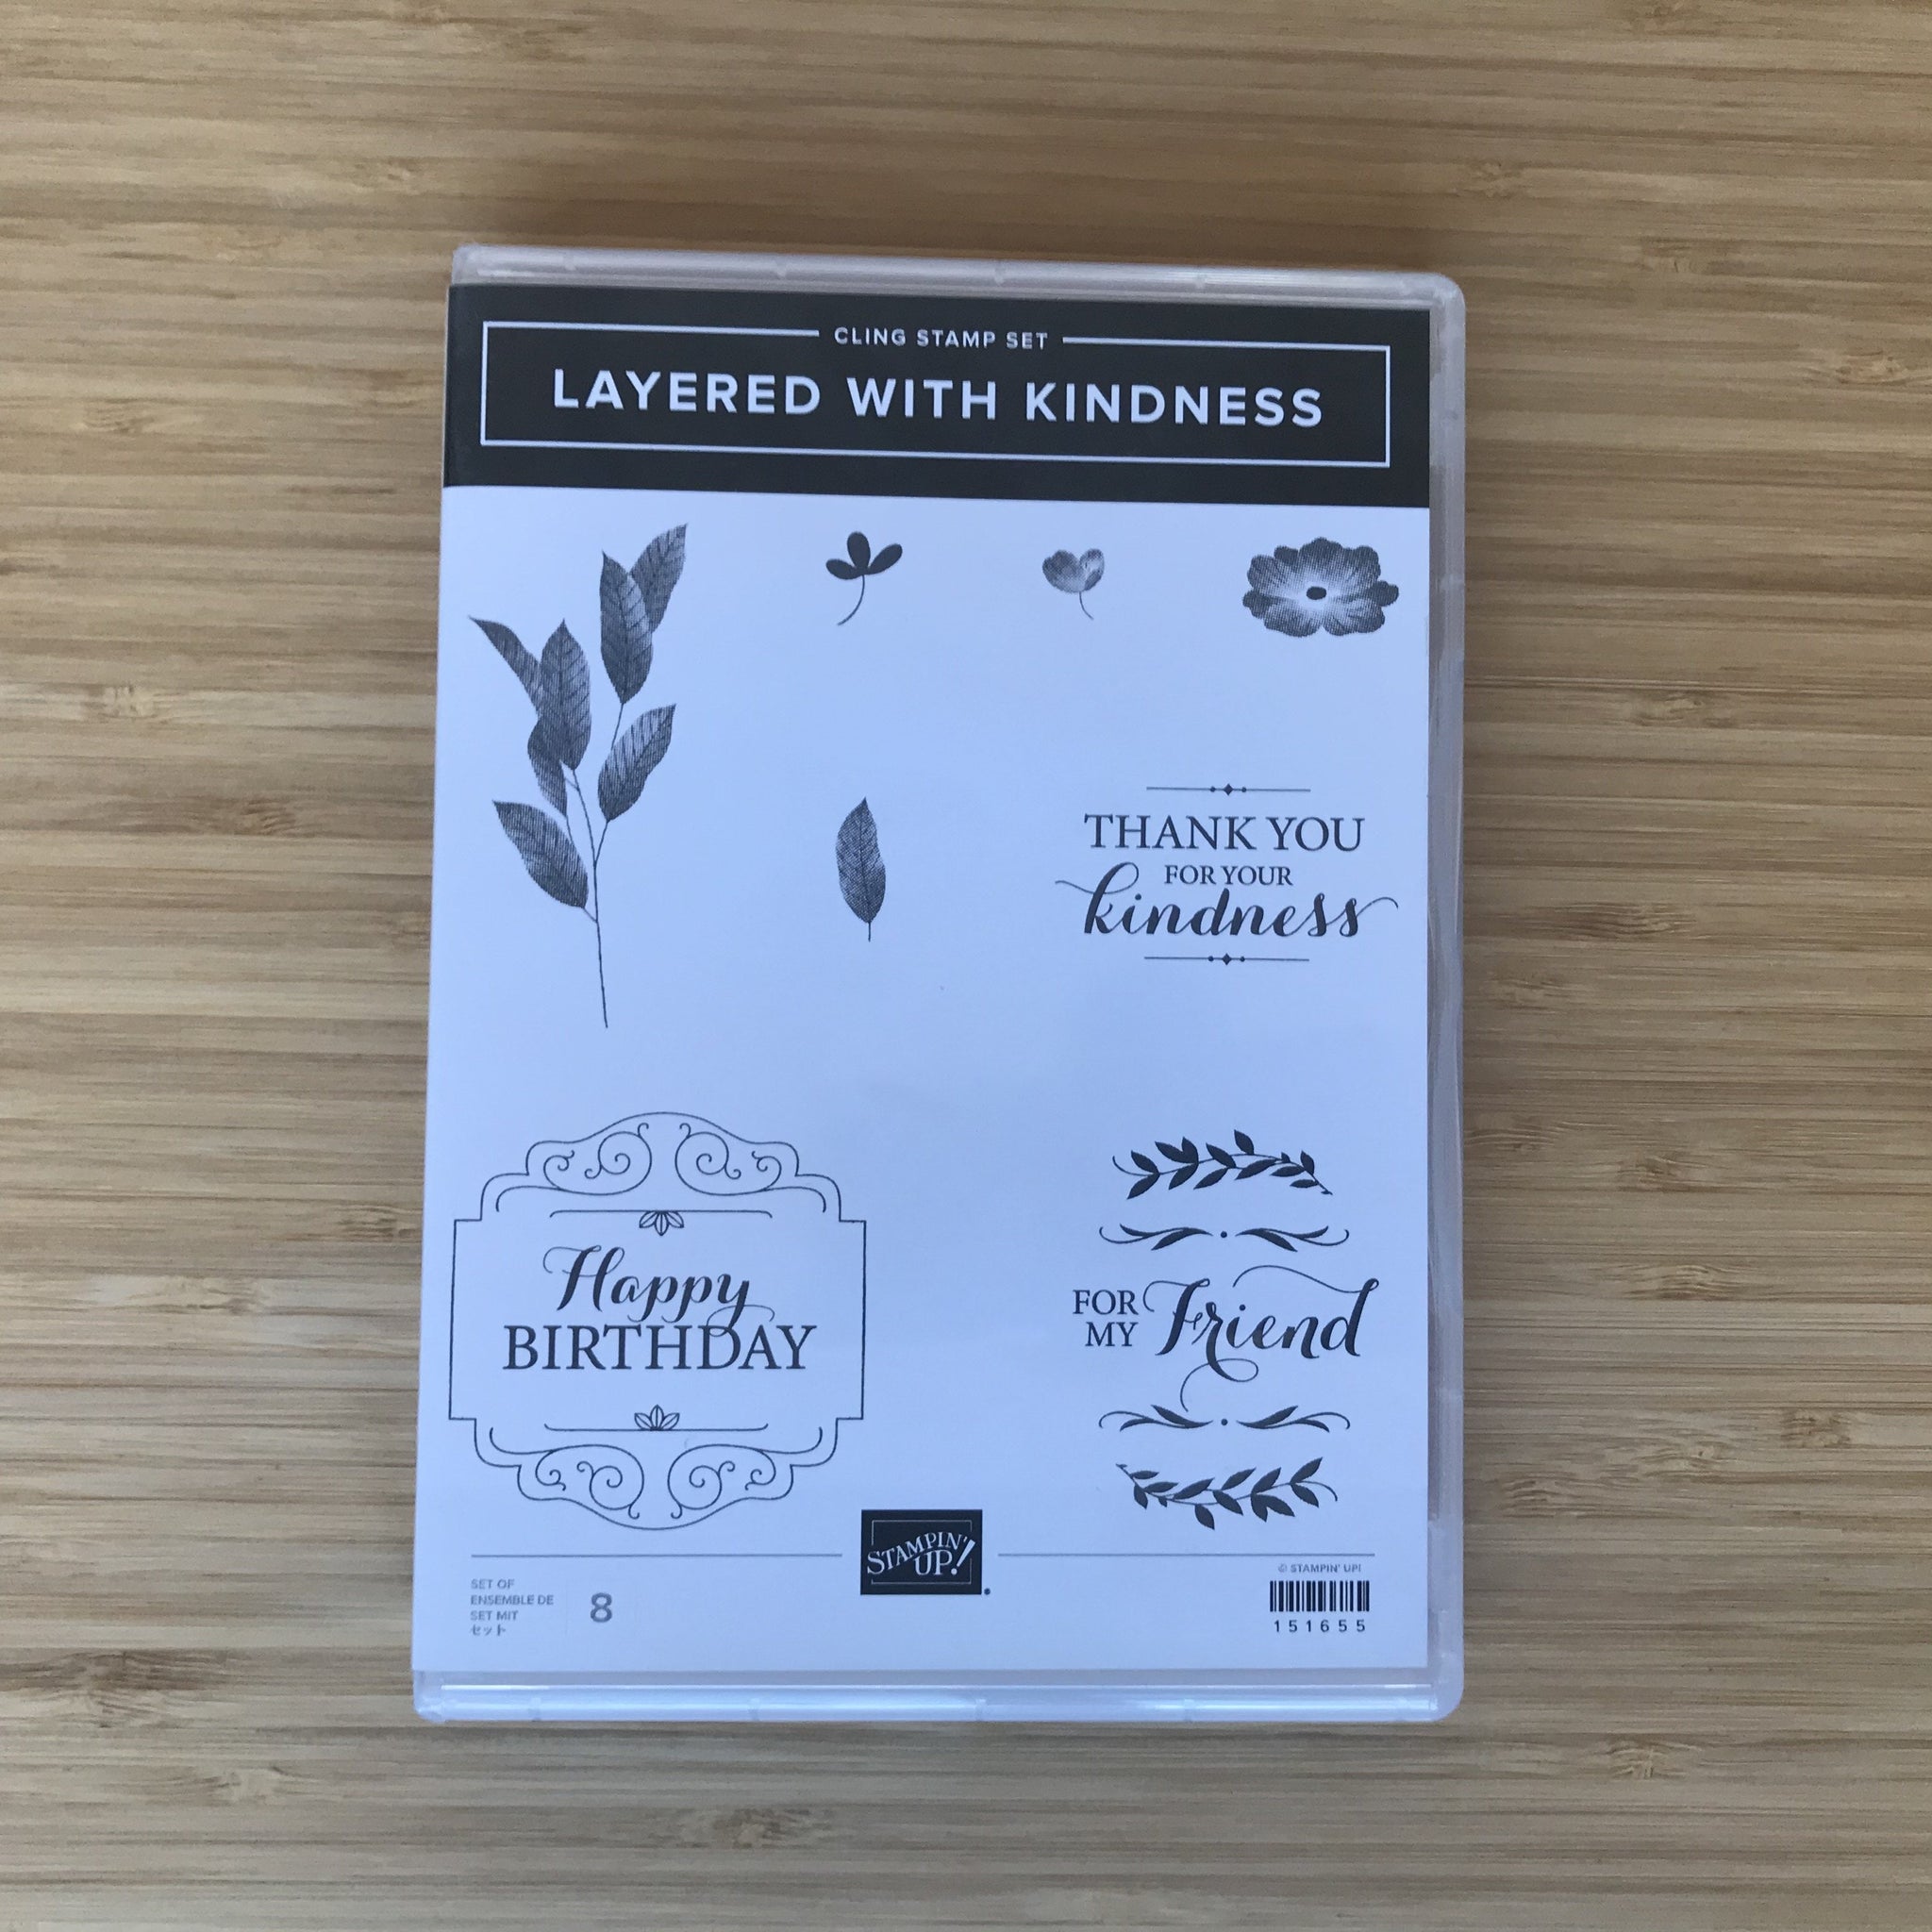 Layered With Kindness | Retired Cling Stamp Set  | Stampin' Up!®